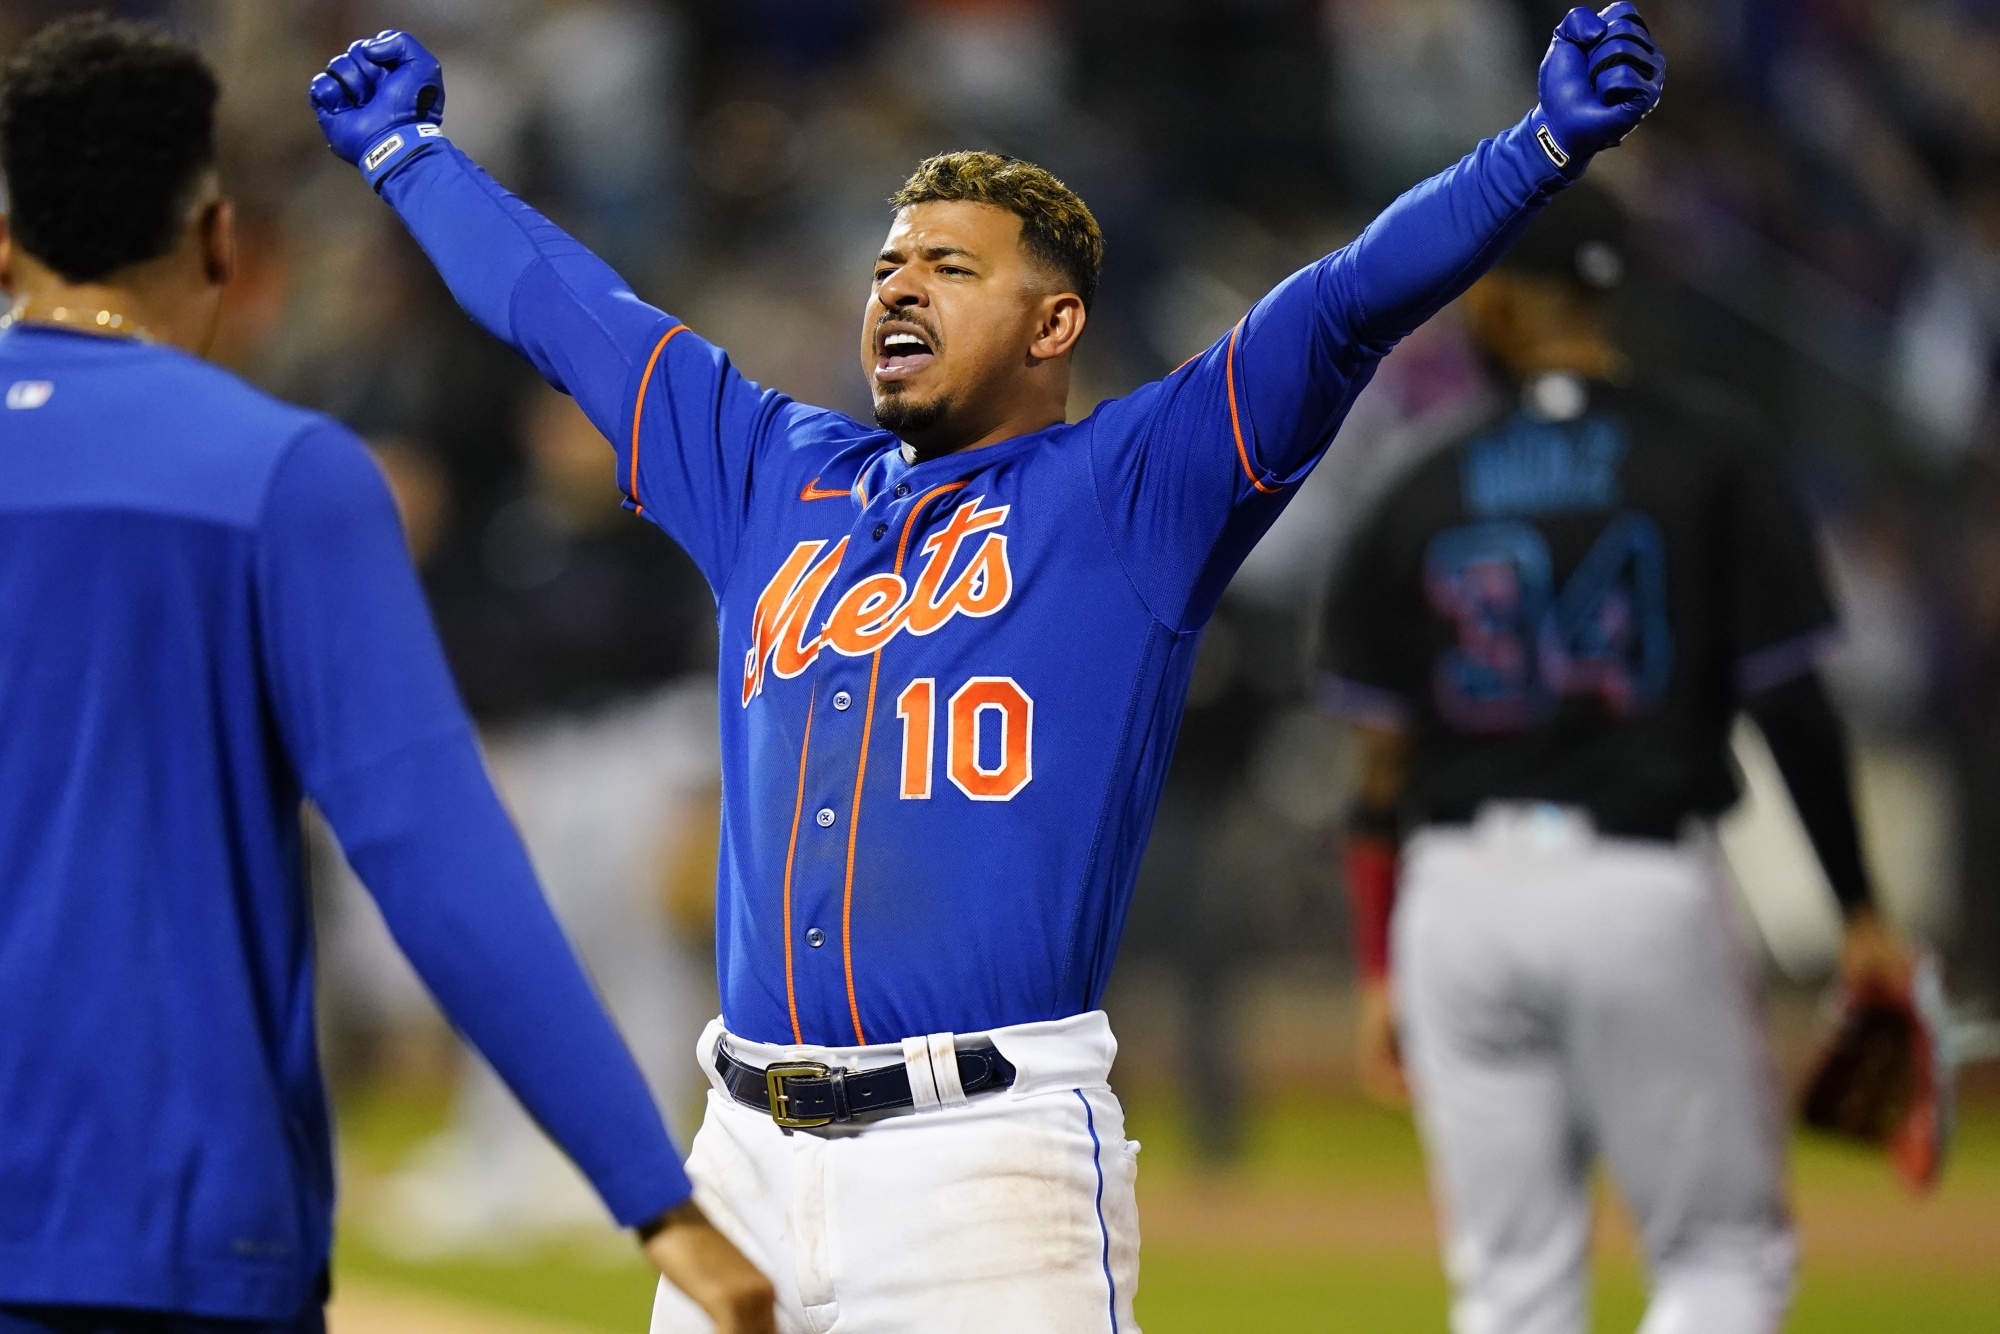 NY Mets record for most intentional walks in a season